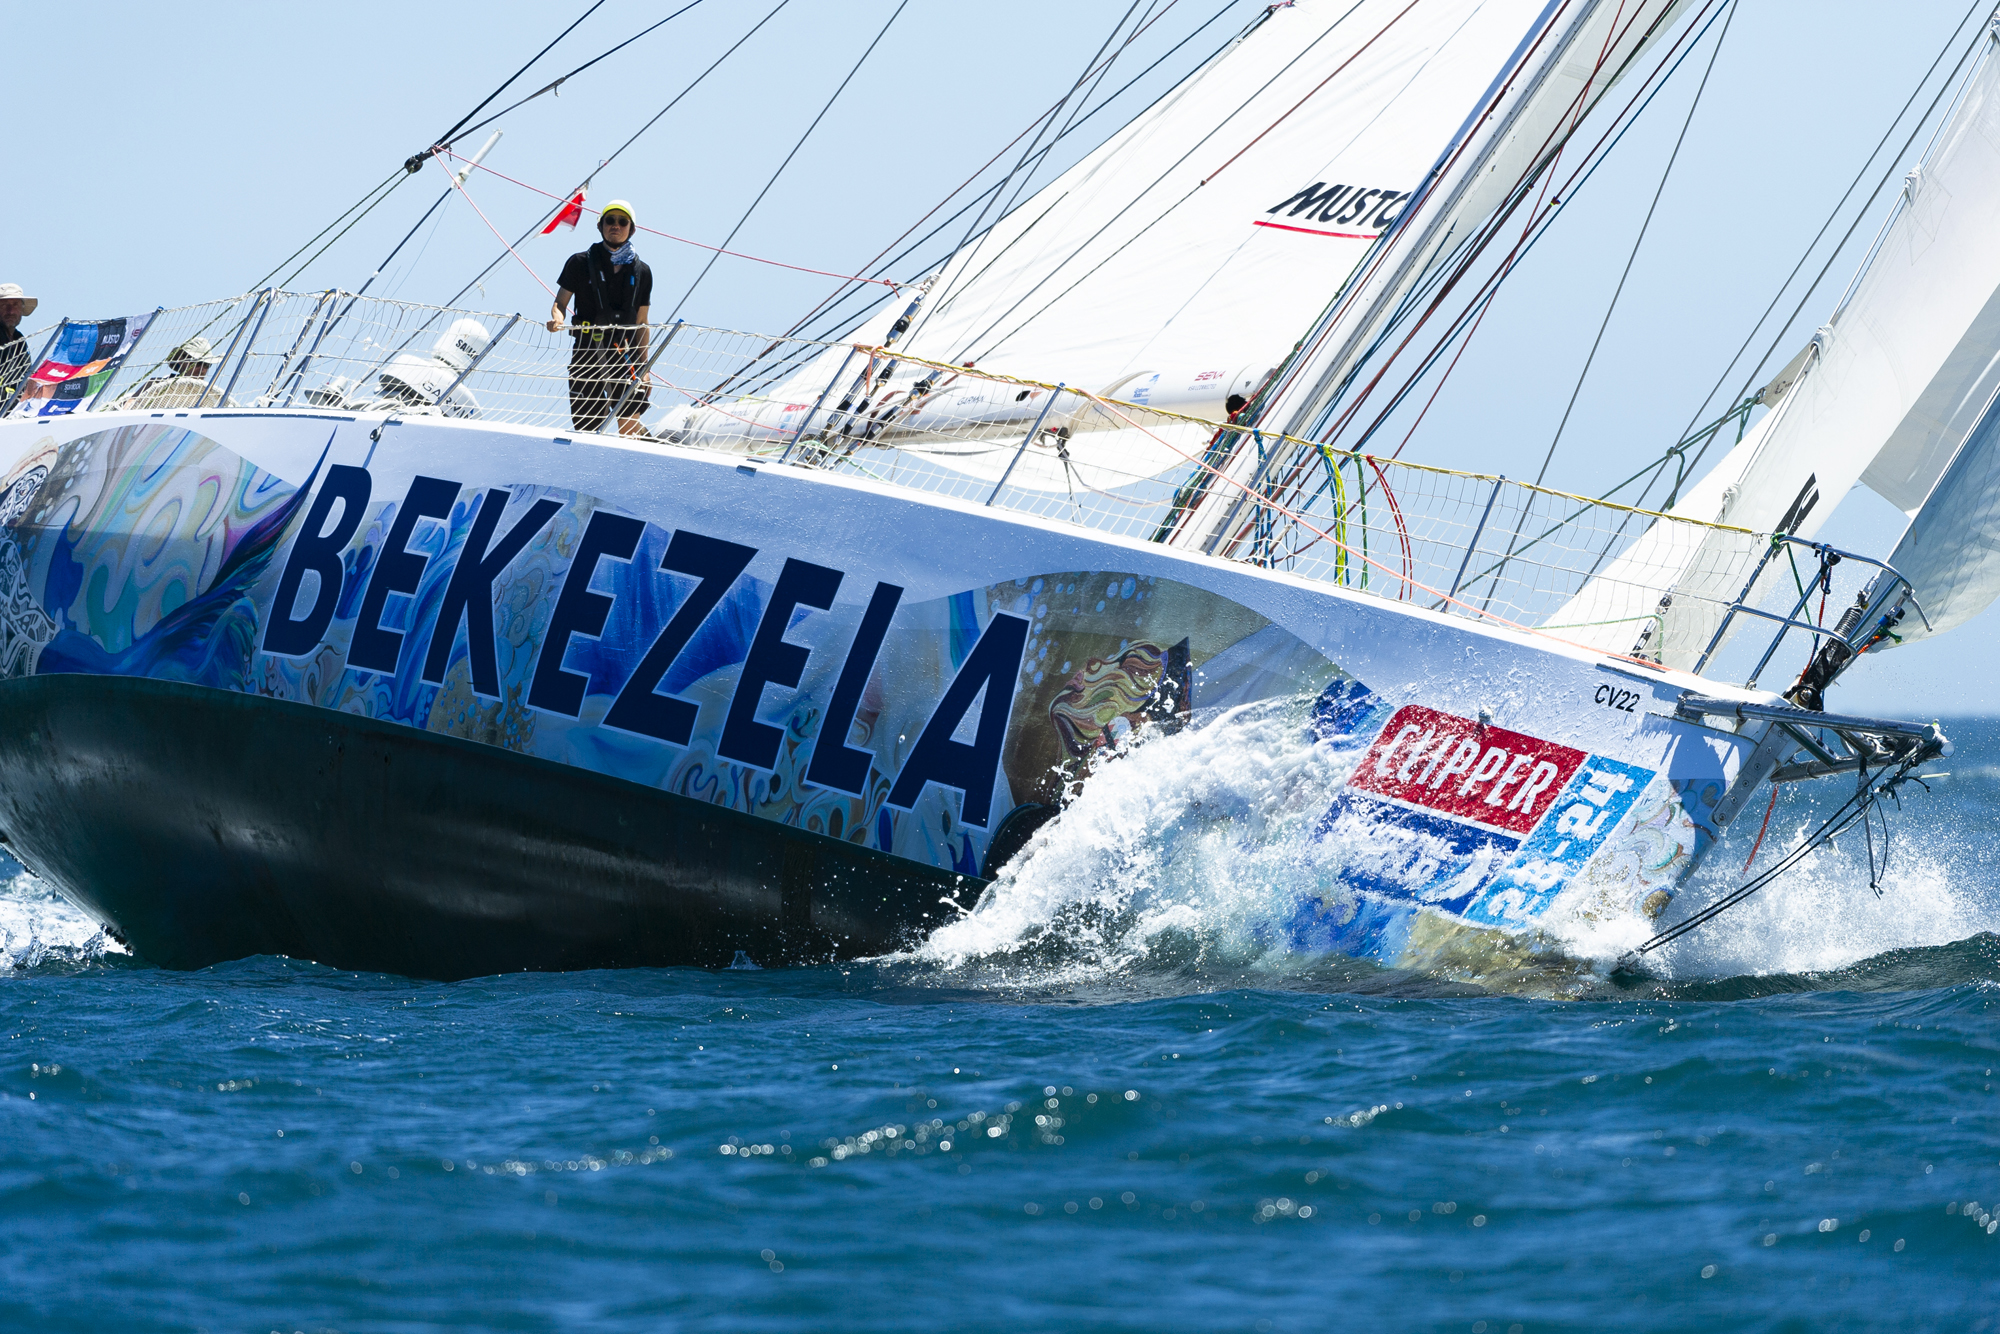 Bekezela Accepts 11th Position for Race 6